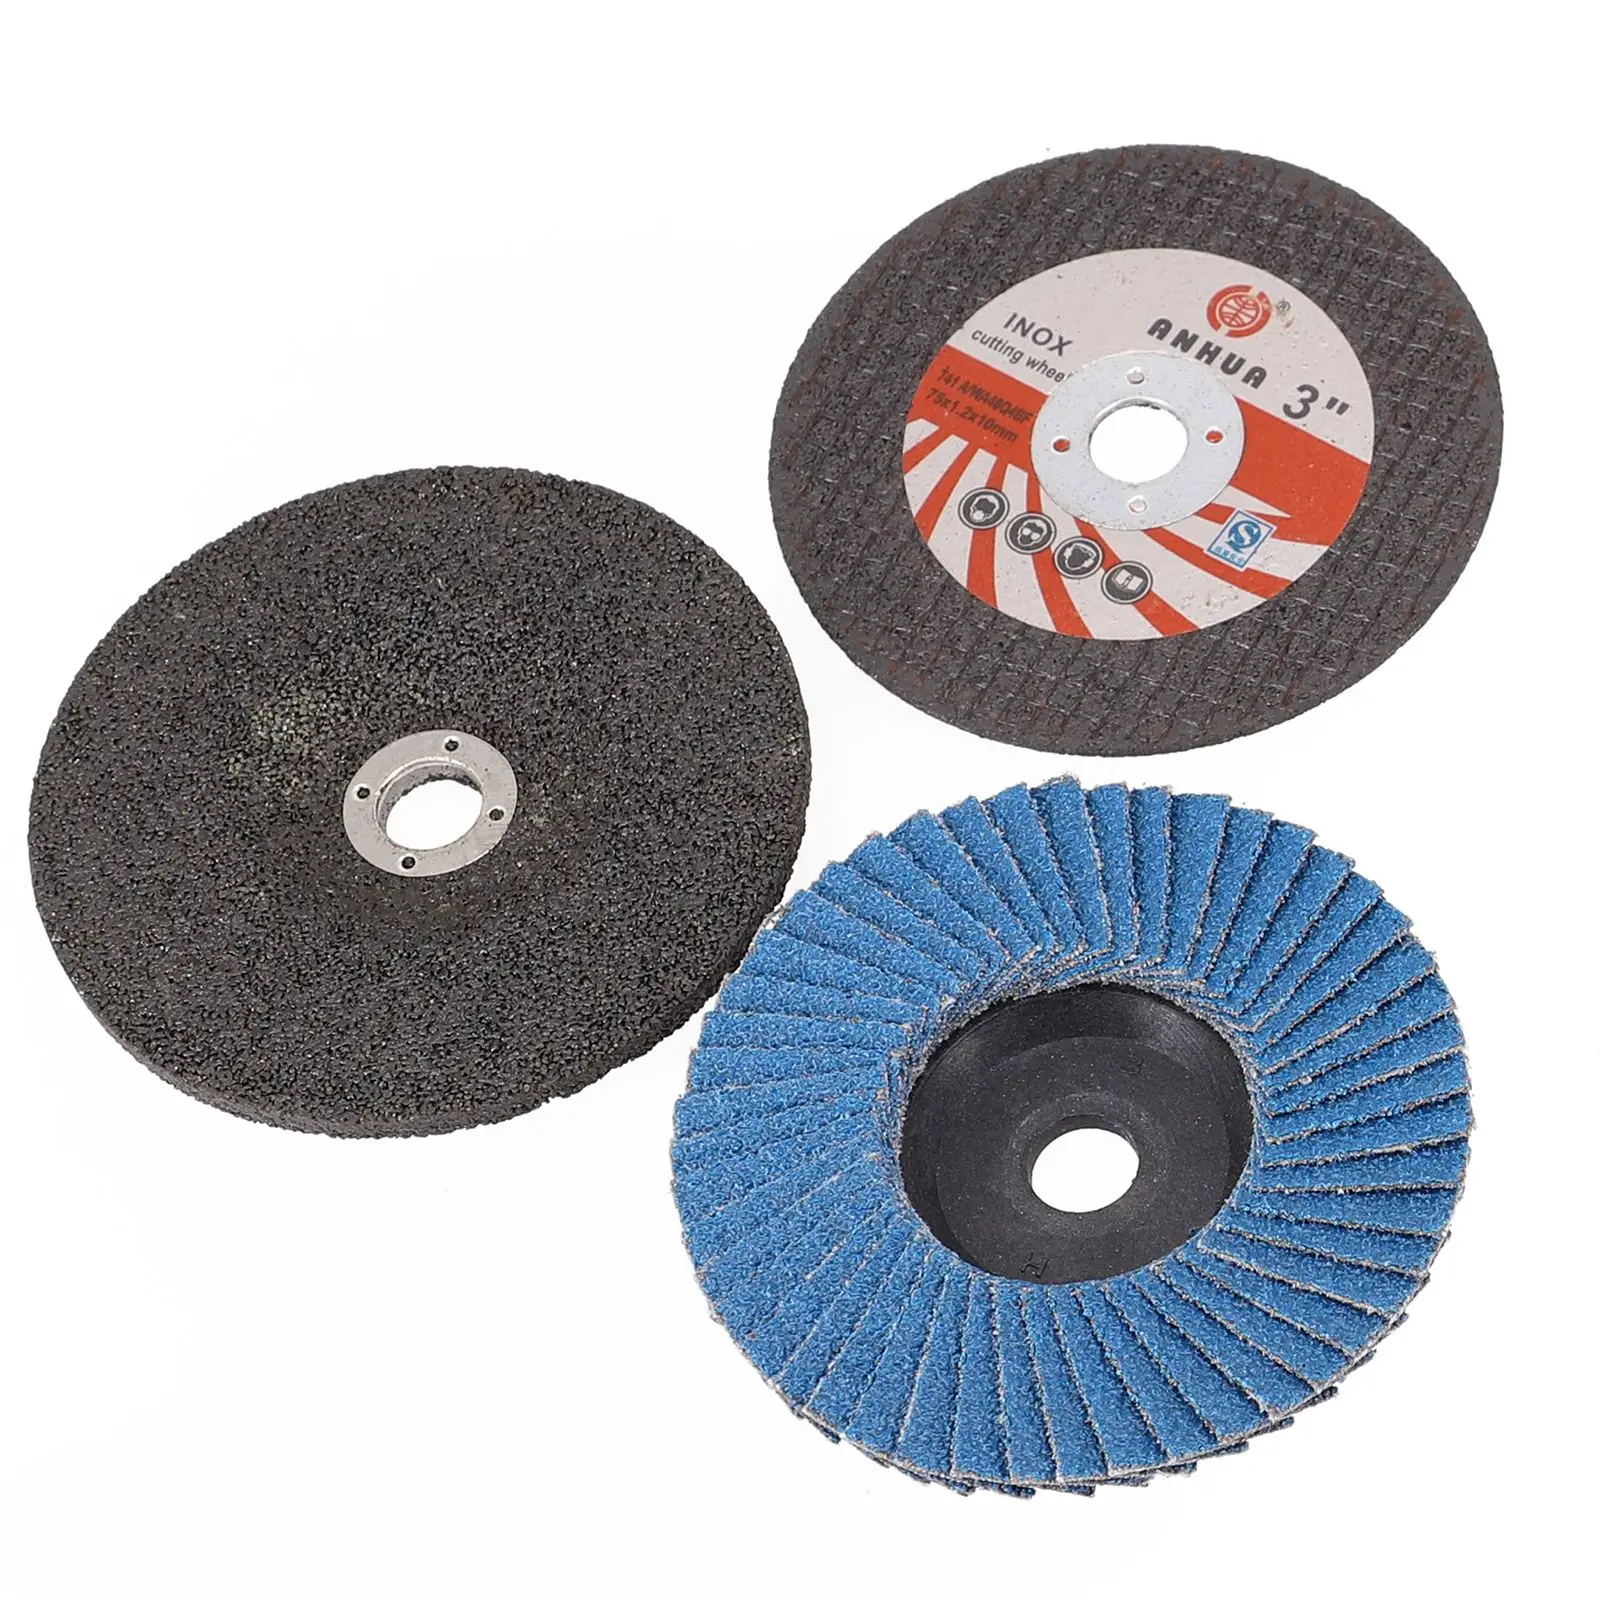 Brand New Cutting Disc Grinding Wheel Circular Saw Blade For Angle Grinder For Ceramic Tile Wood Polishing Disc wood carving cutting disc for angle grinder duty 2 in1chain saw blade carbide steel grinder shaping disc woodworking accessories